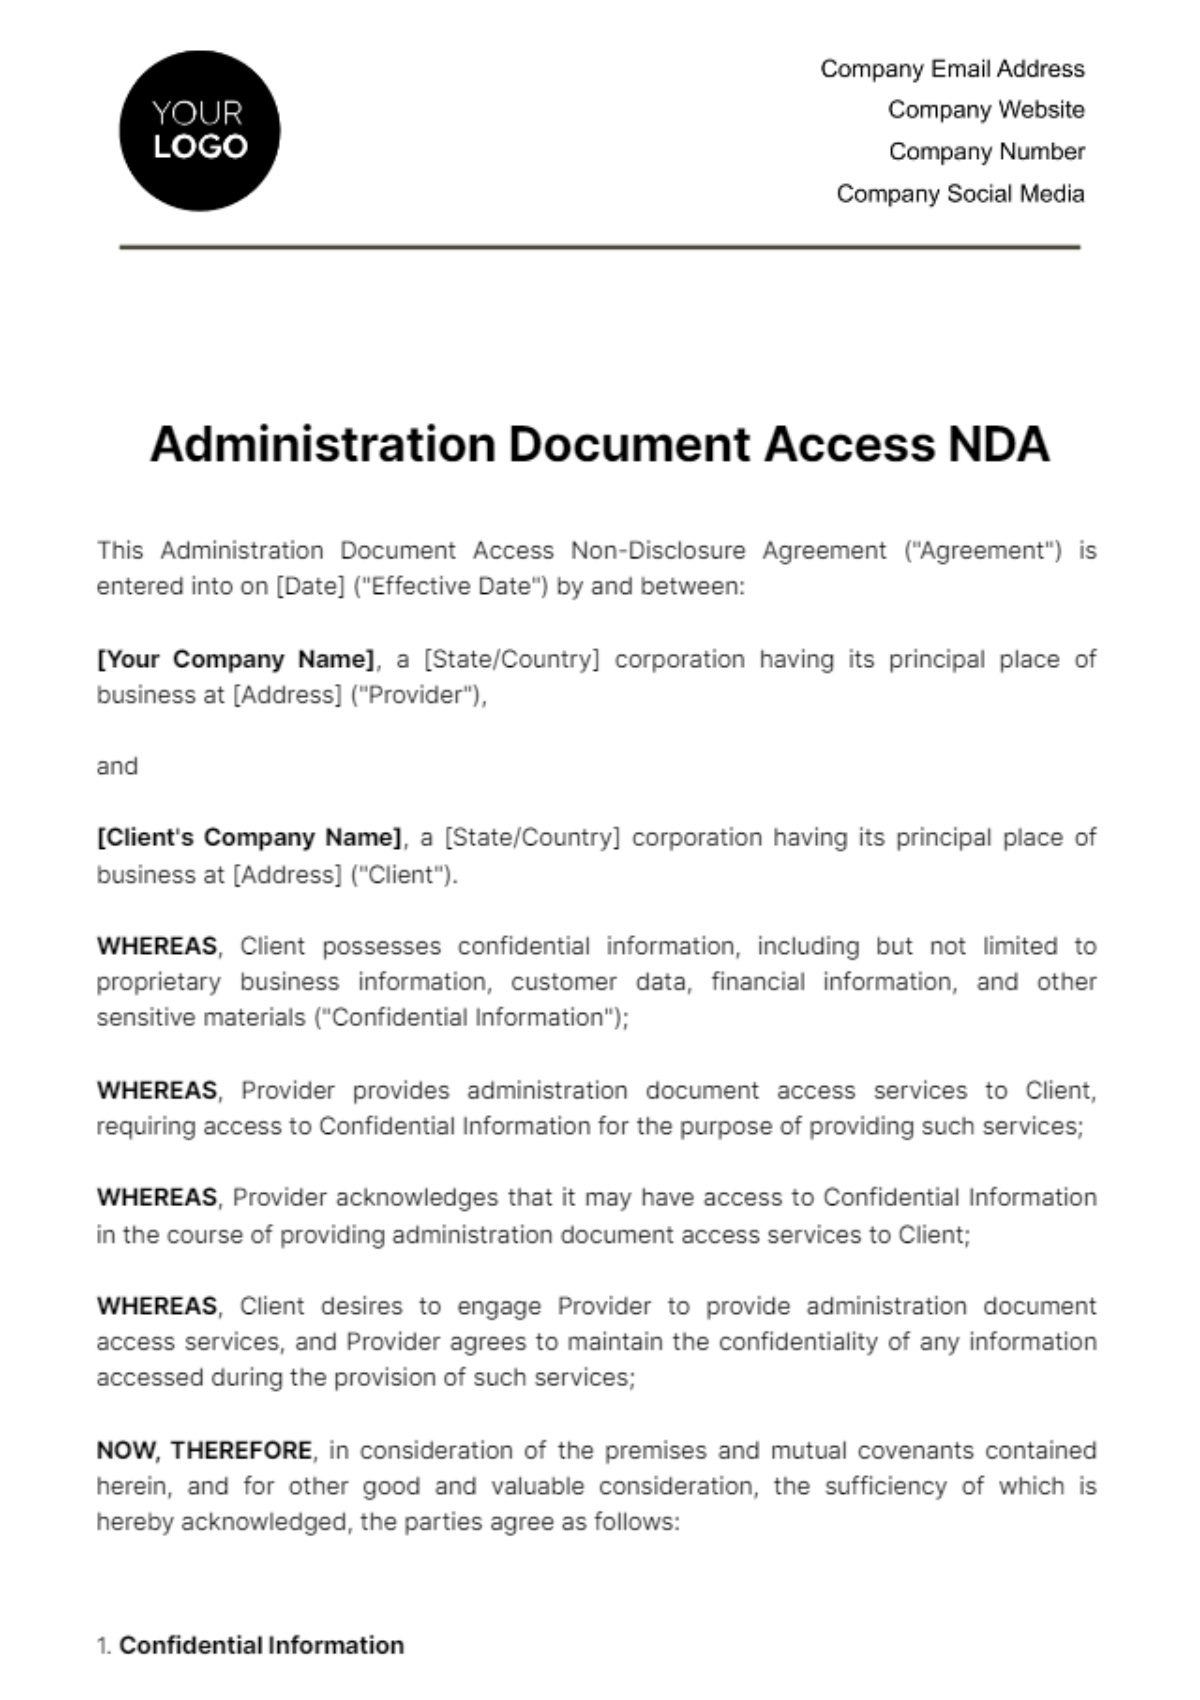 Administration Document Access NDA Template